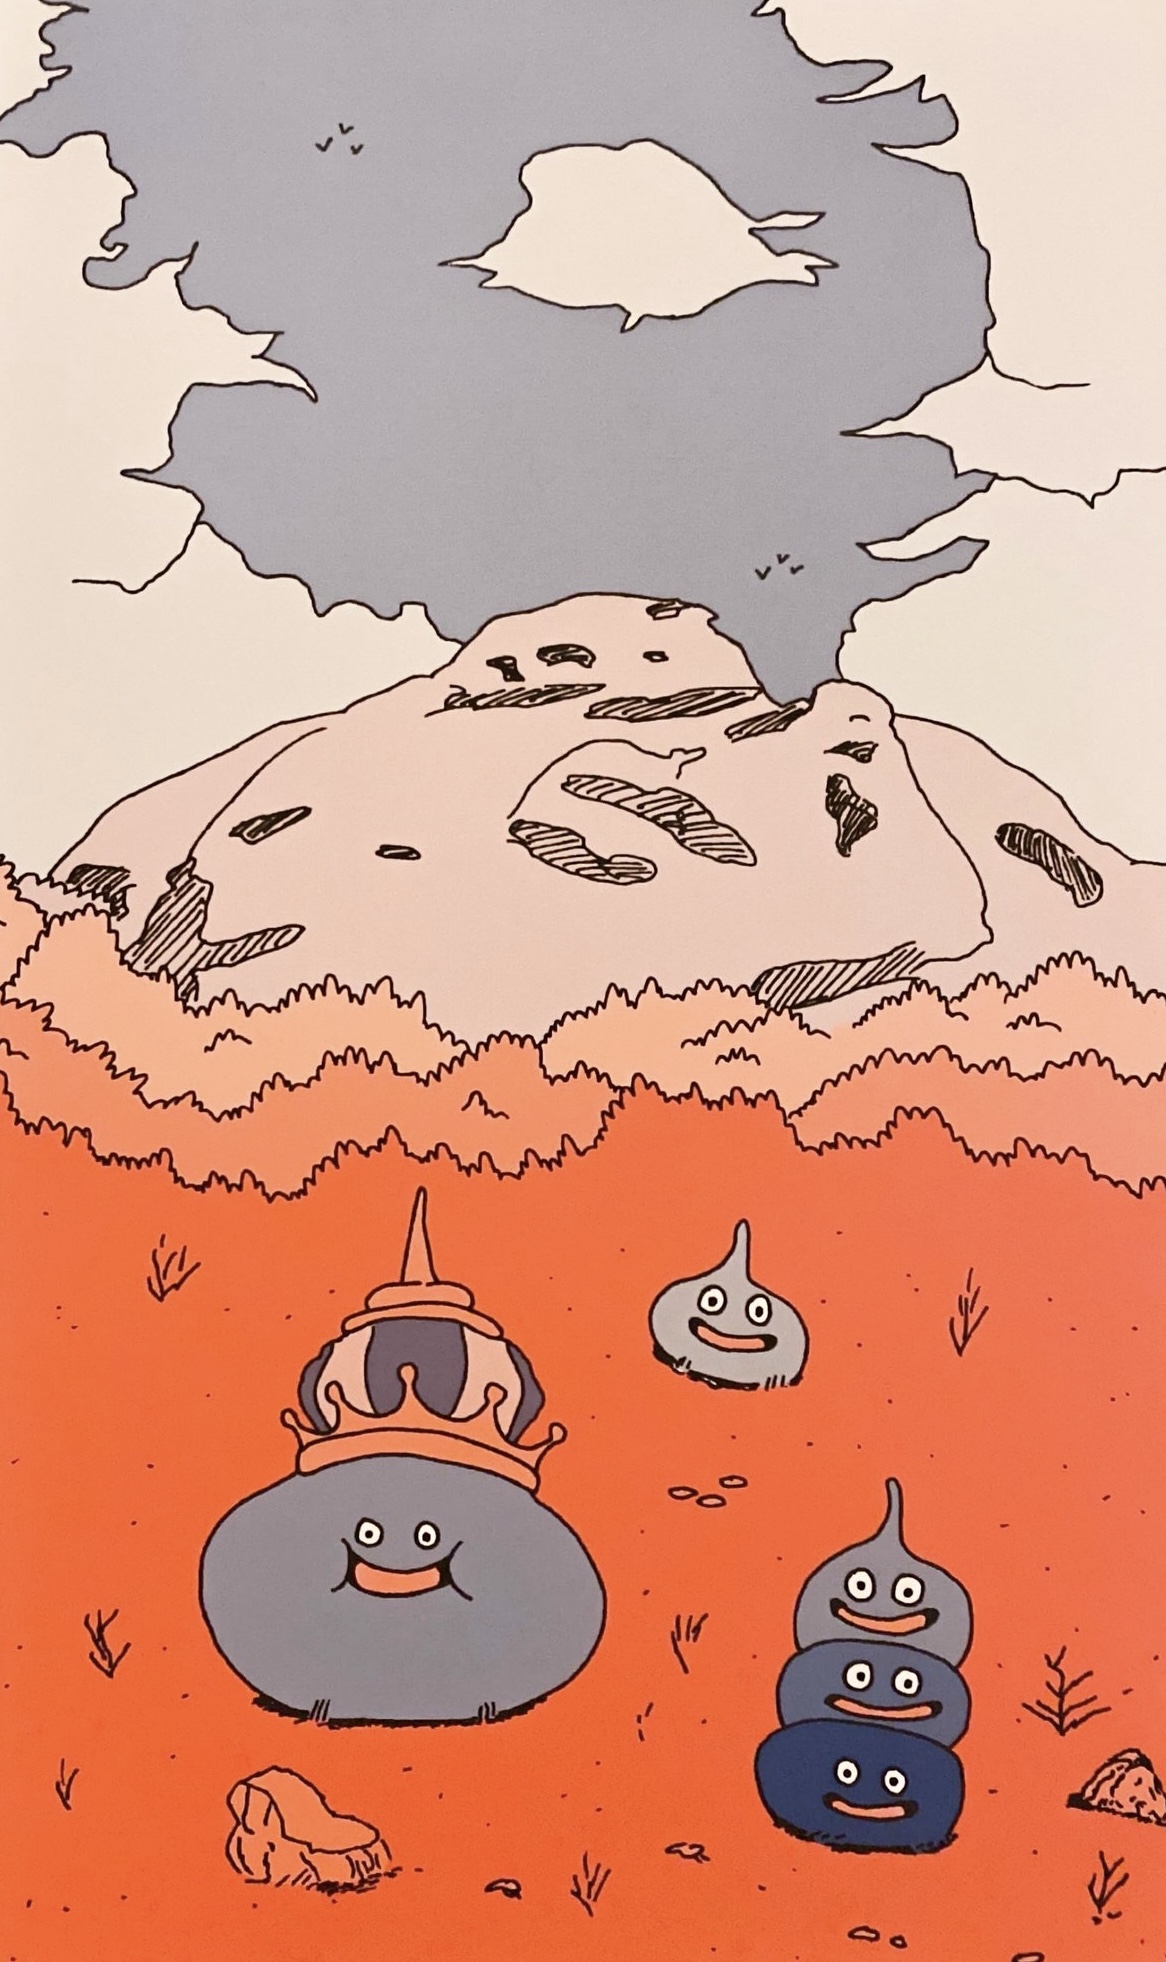 a drawing of a dragon quest slime, a king slime, and a slime stack in front of a mountain